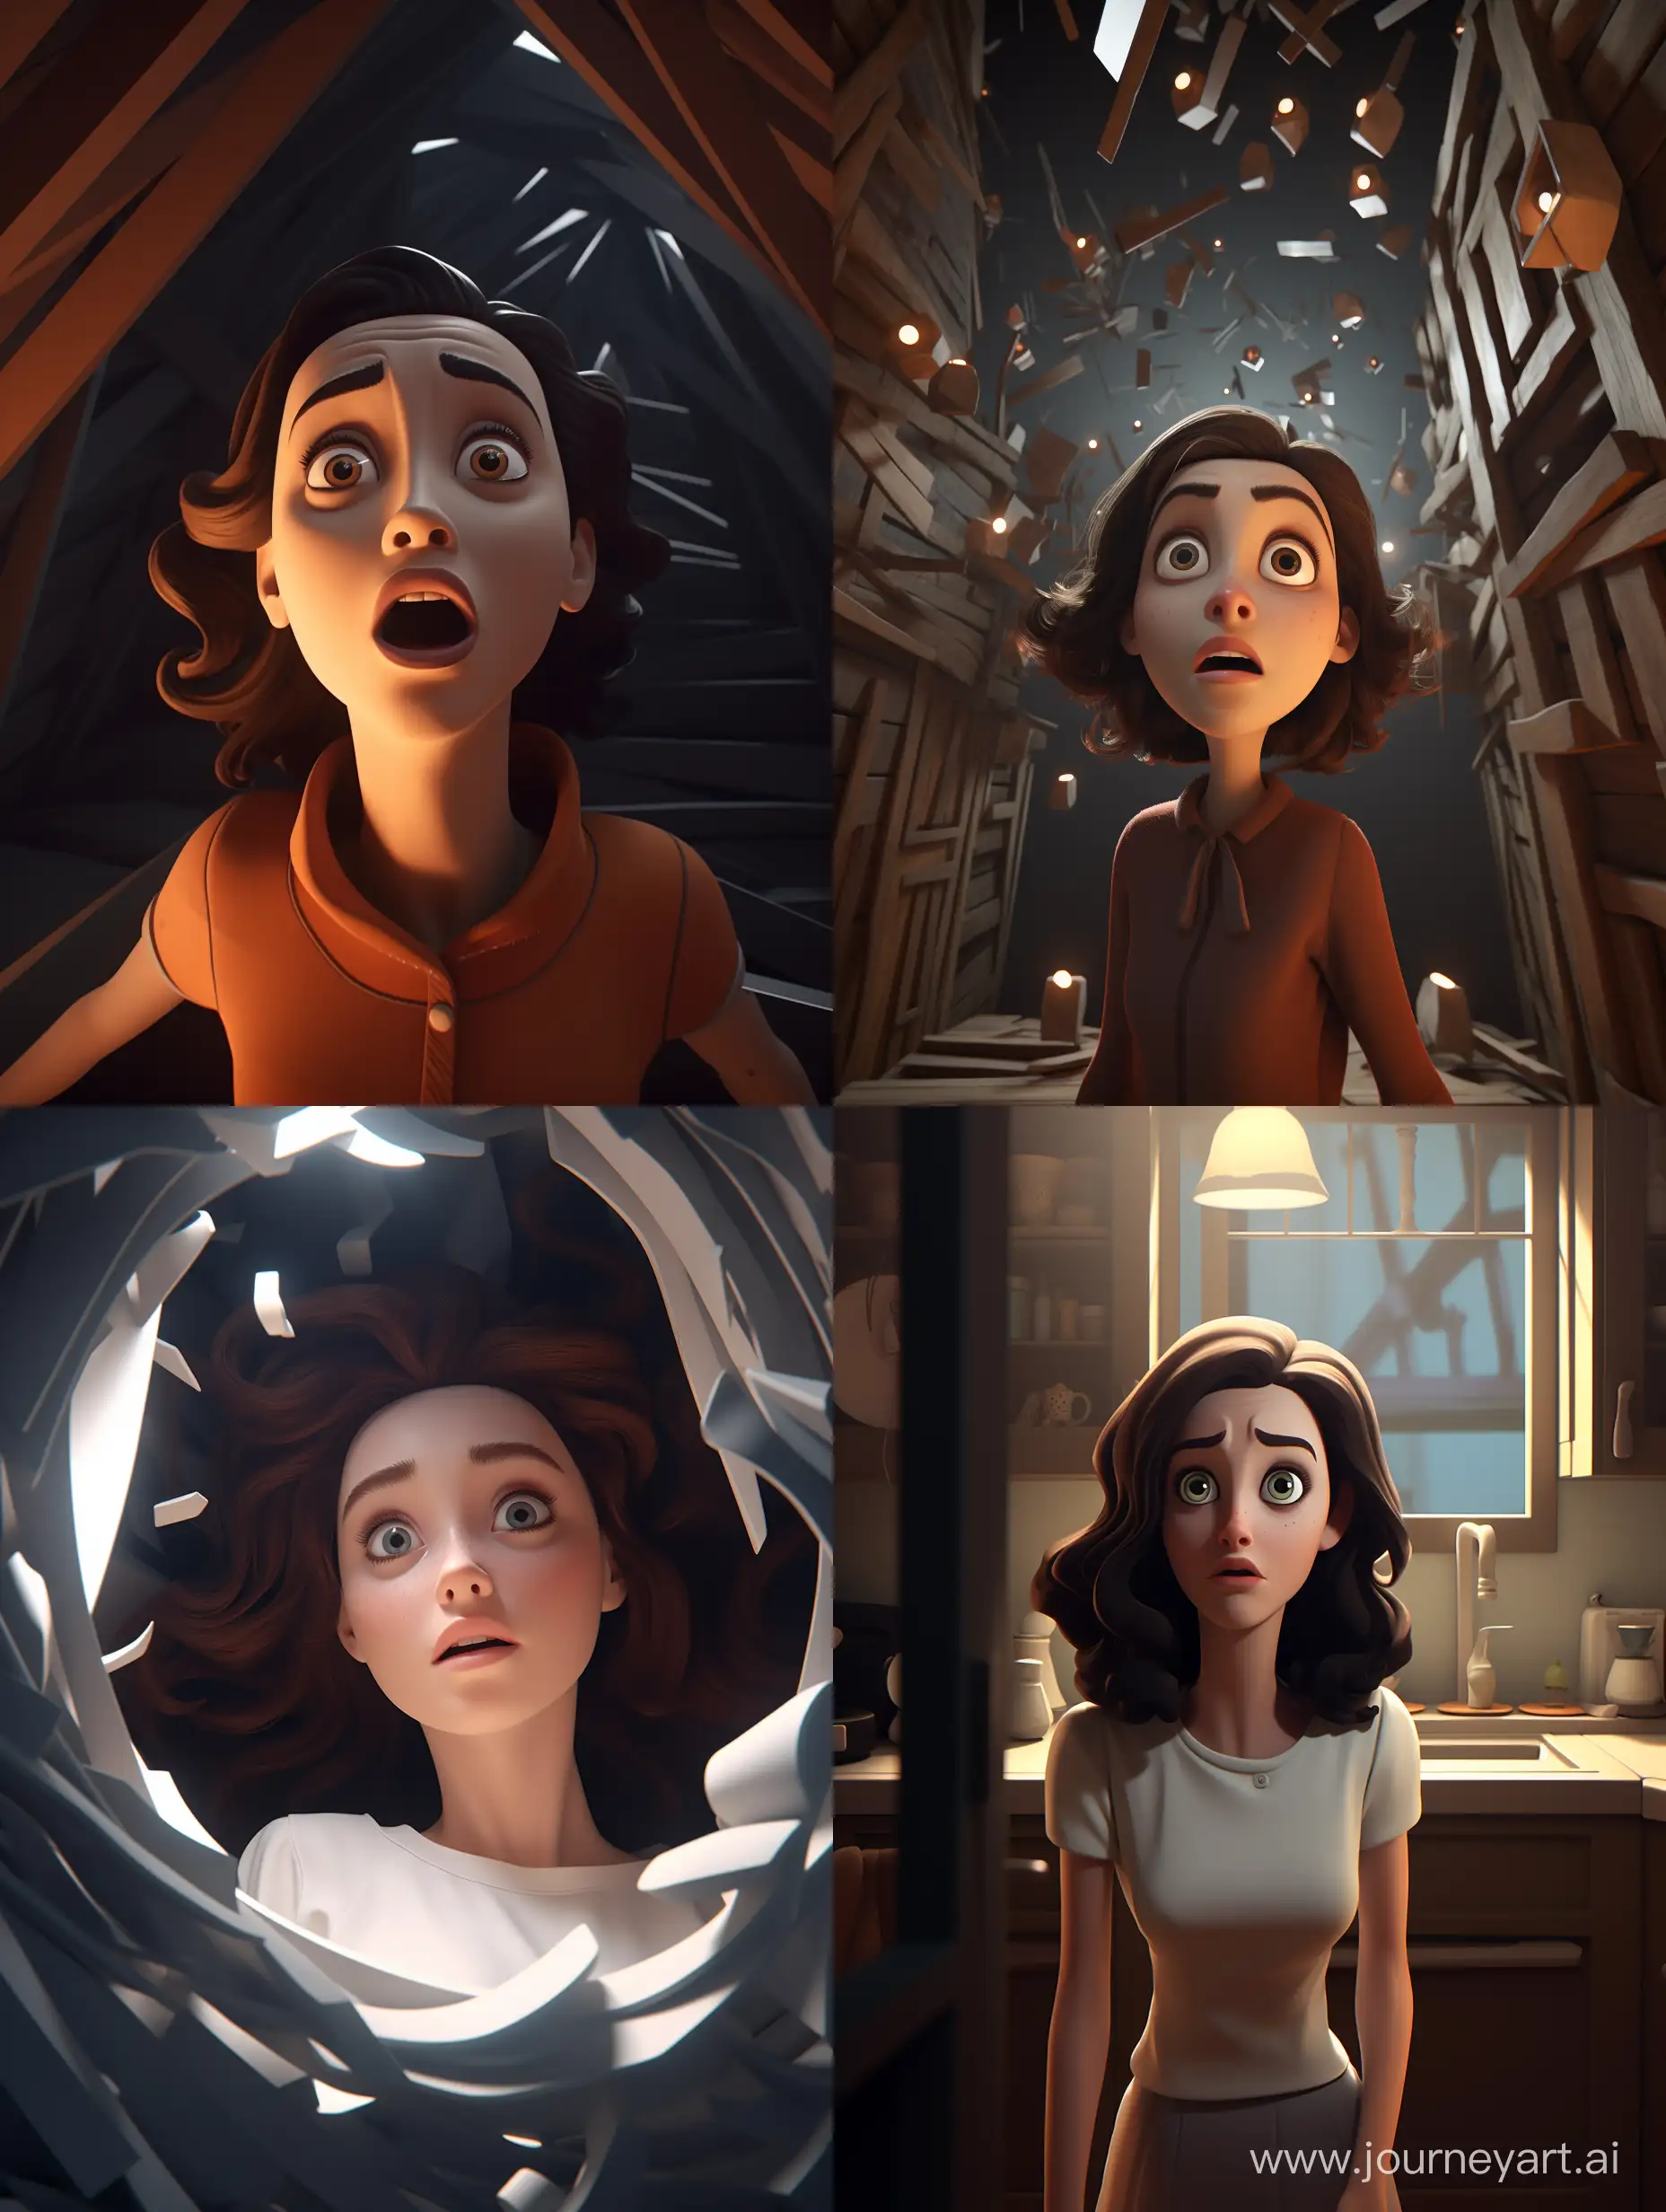 The woman was afraid of what she saw. 3d animation style